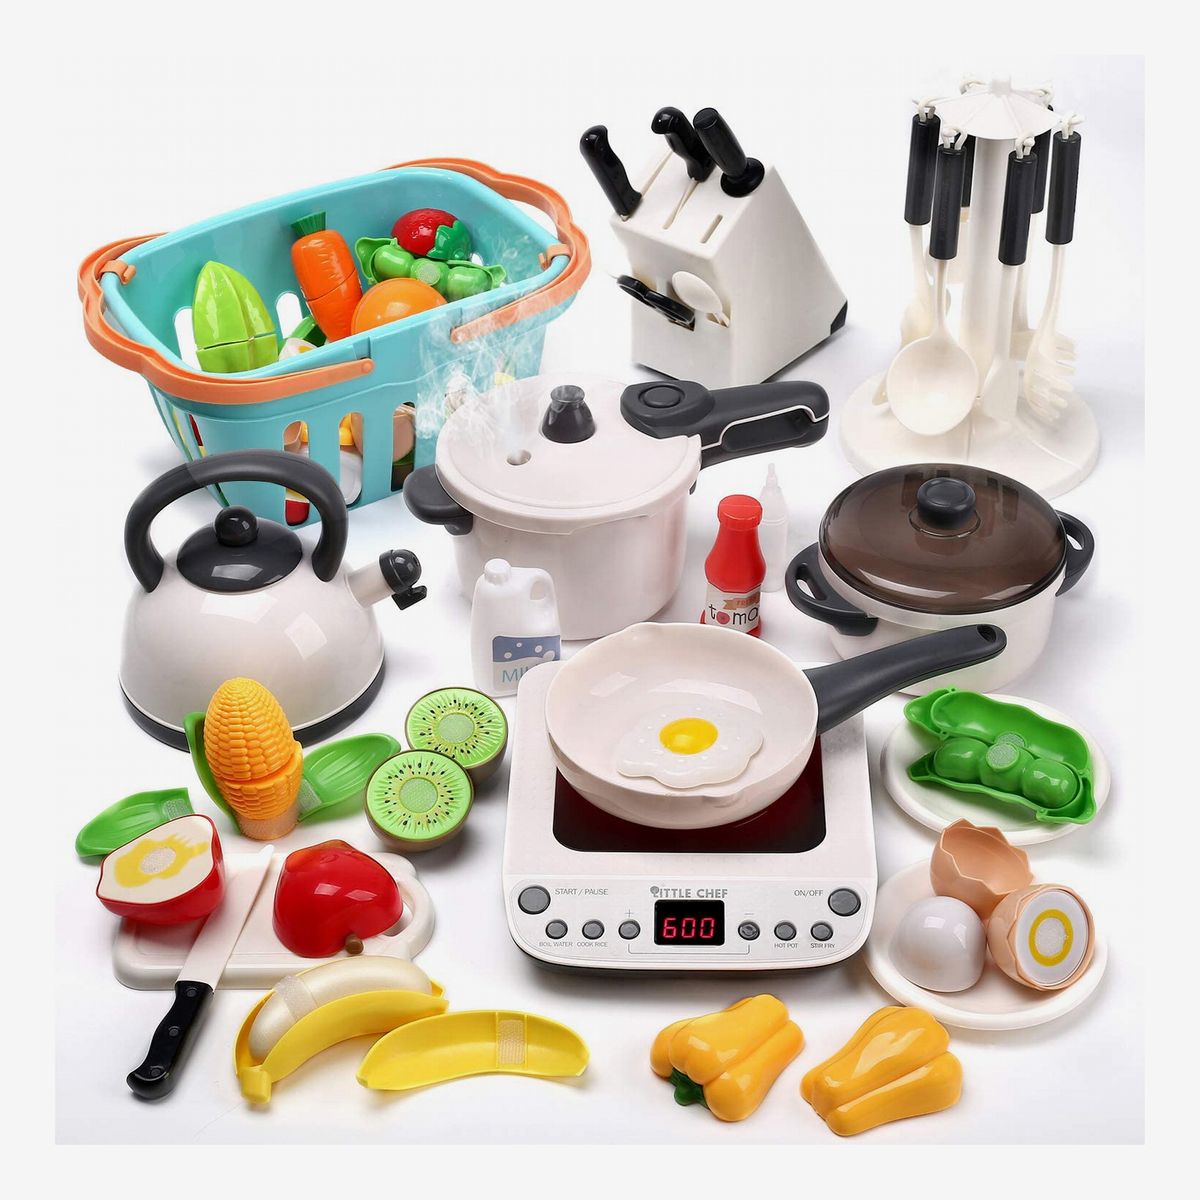 2021 Kitchen Playset Microwave Toys Learning Pretend Play Cooking Set 